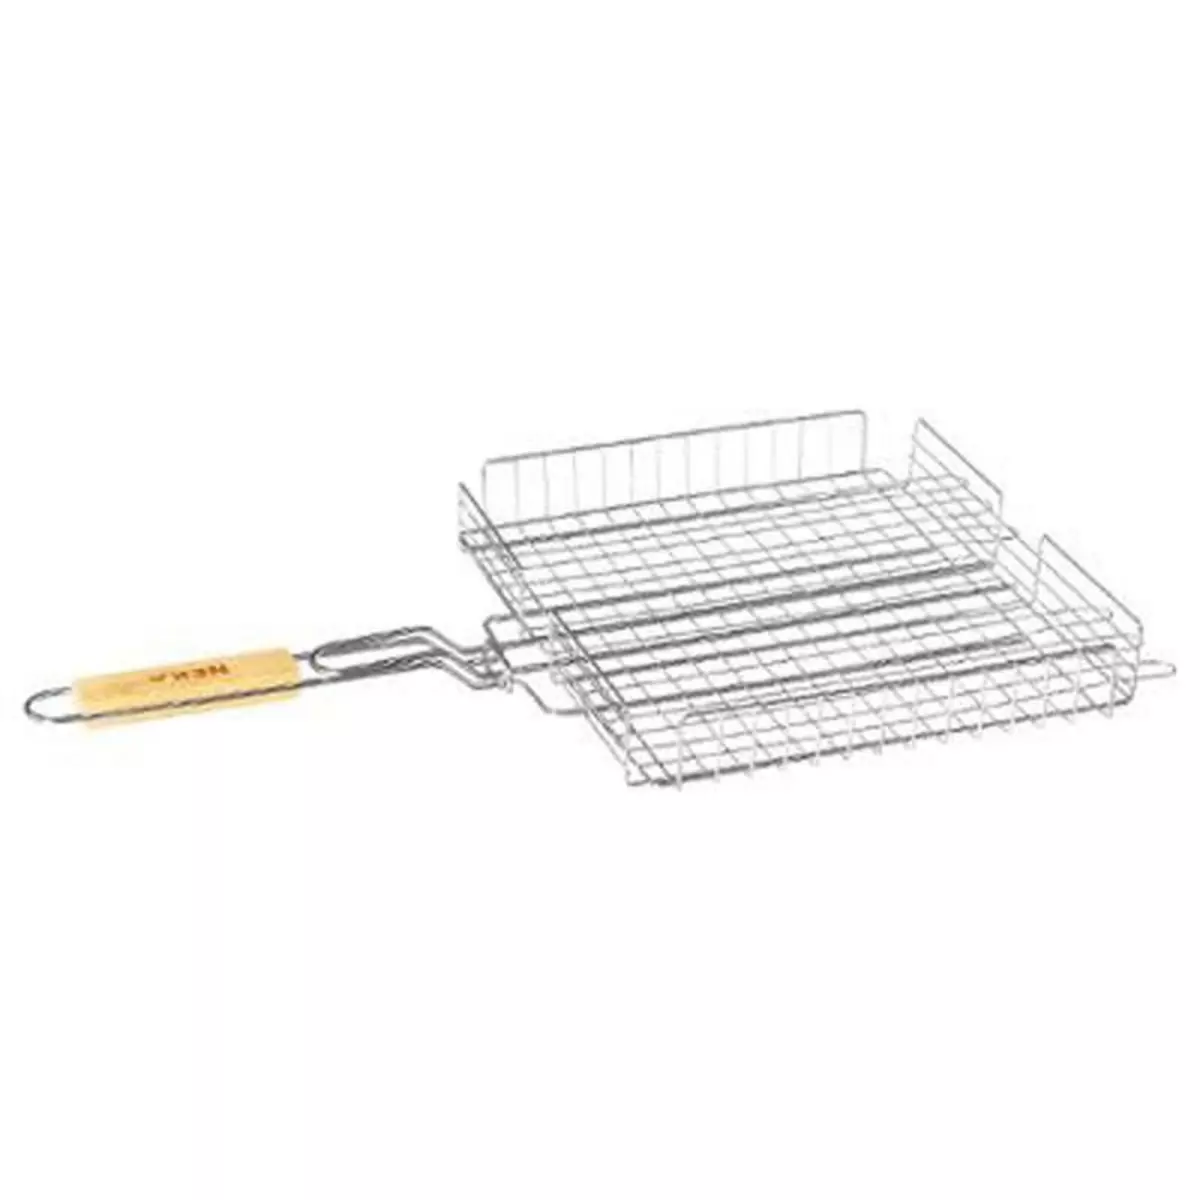  Grille Barbecue Panier  Summer  34x31cm Chrome